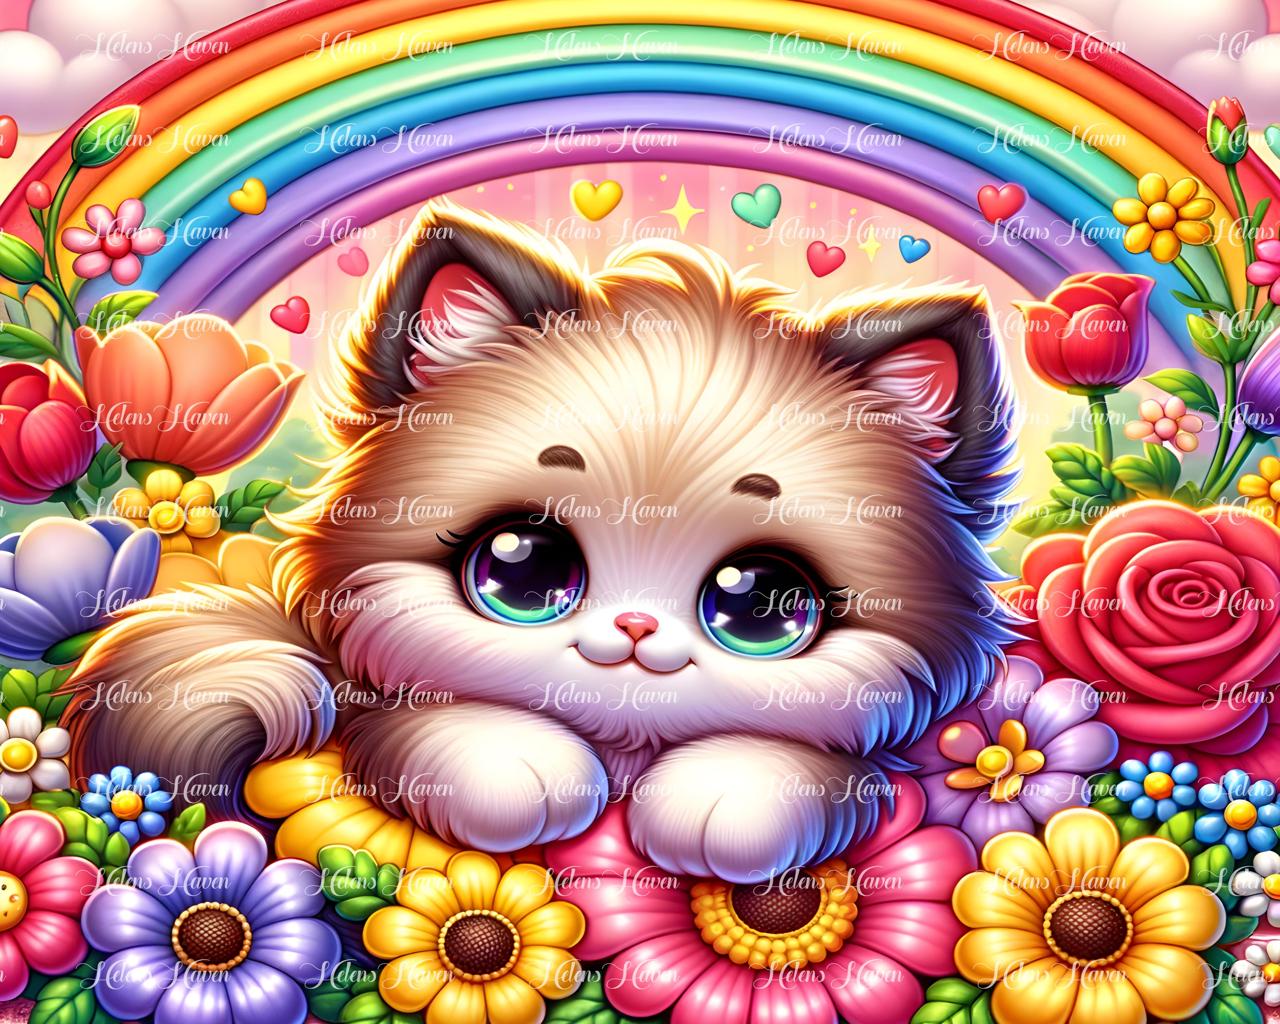 Cute kitty laying on flowers under a rainbow